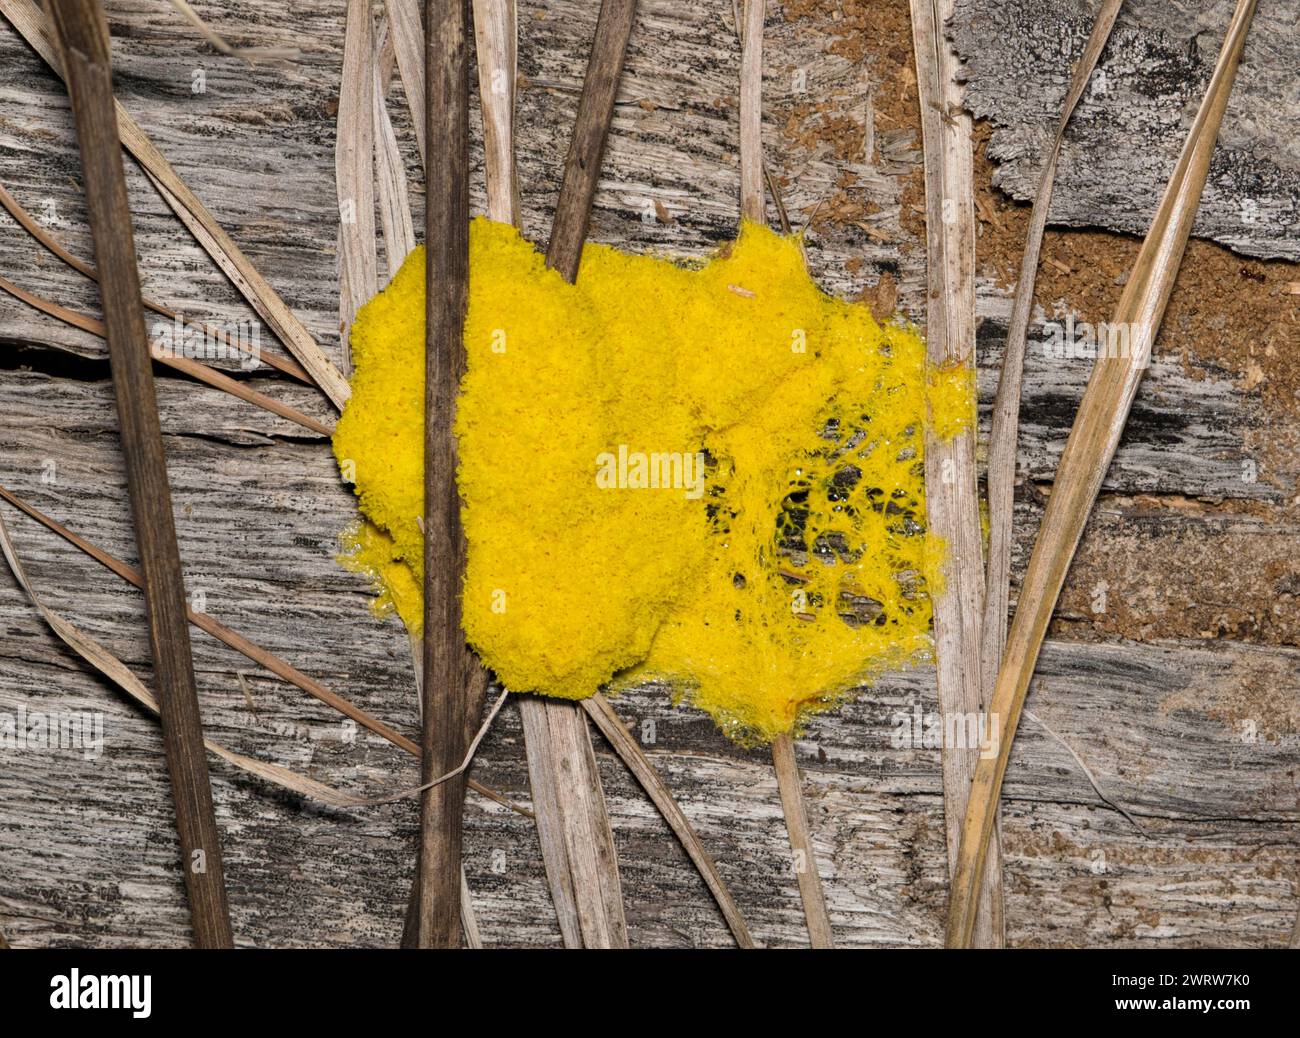 Slime mold (Fuligo septica) on rotting wood, isolated directly above. Class of Myxogastria yellow mold found worldwide, mostly tropical regions. Stock Photo